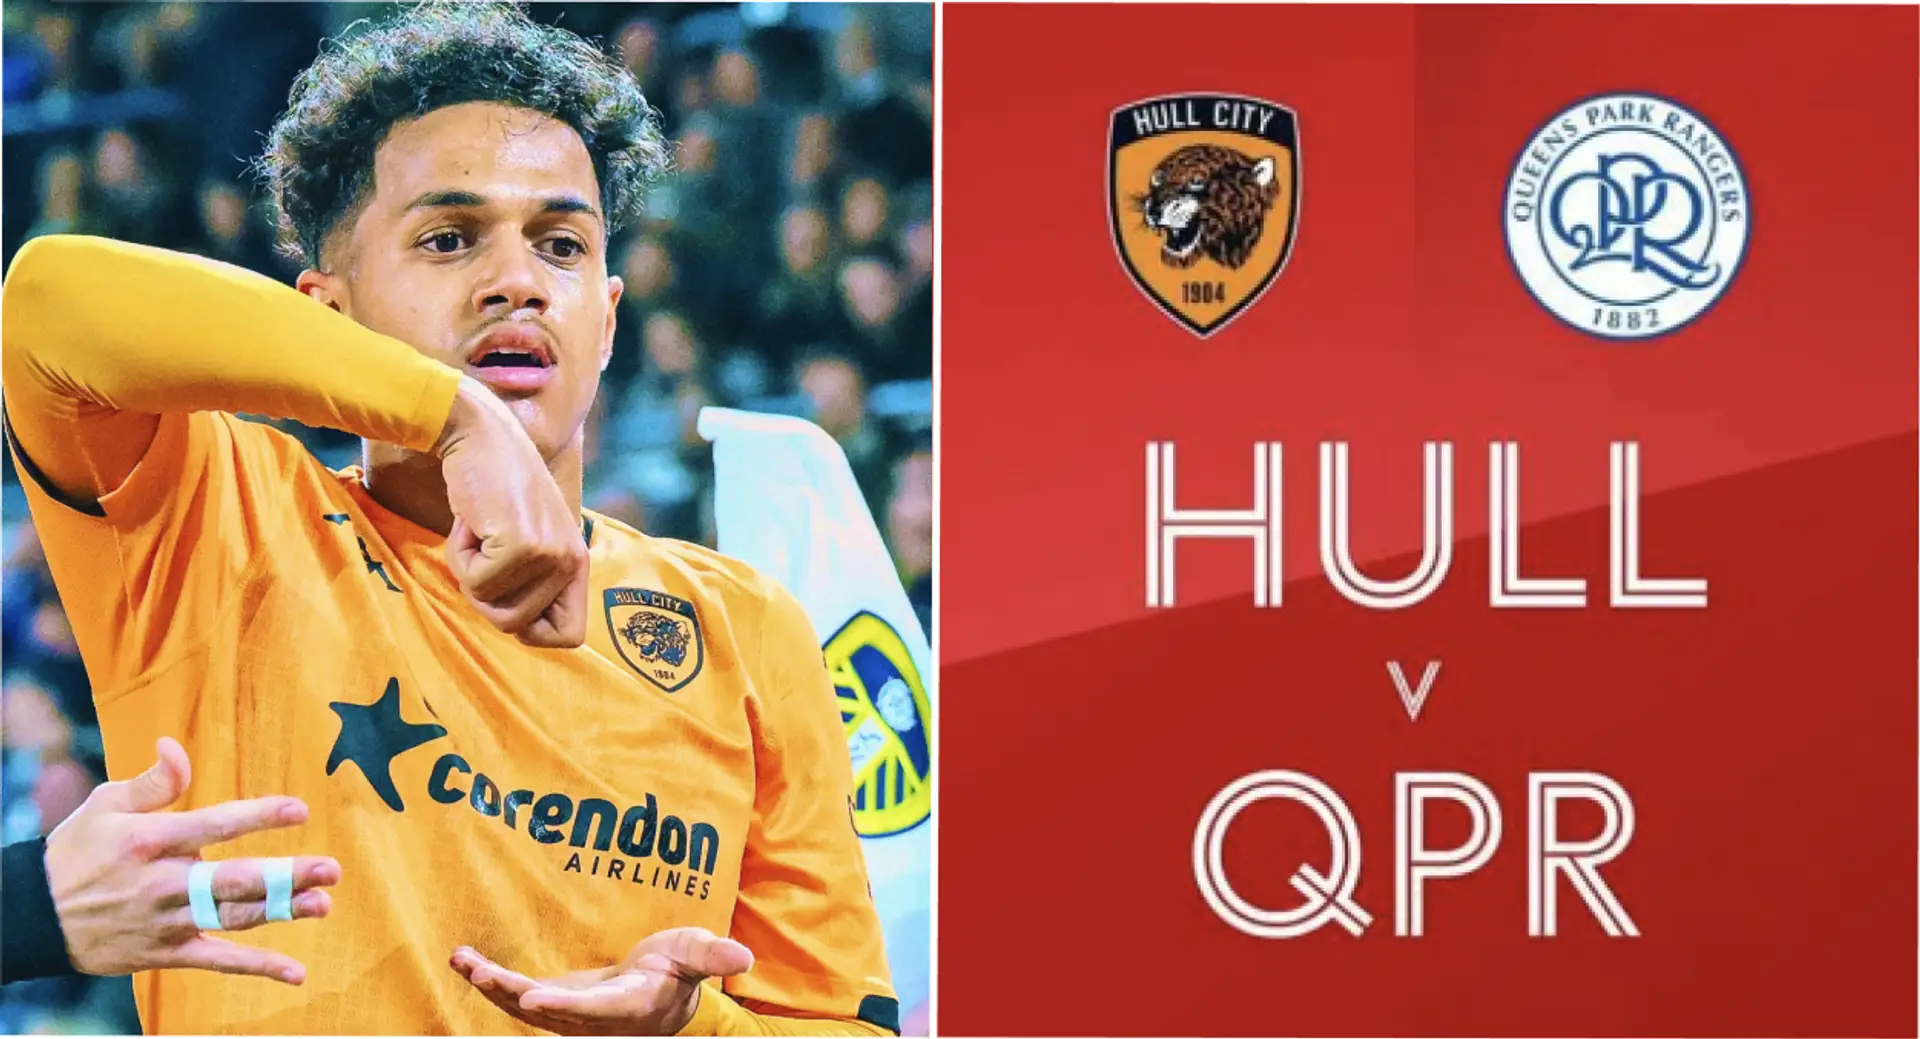 Carvalho keeps shining for Hull and 2 more under-radar stories of the day